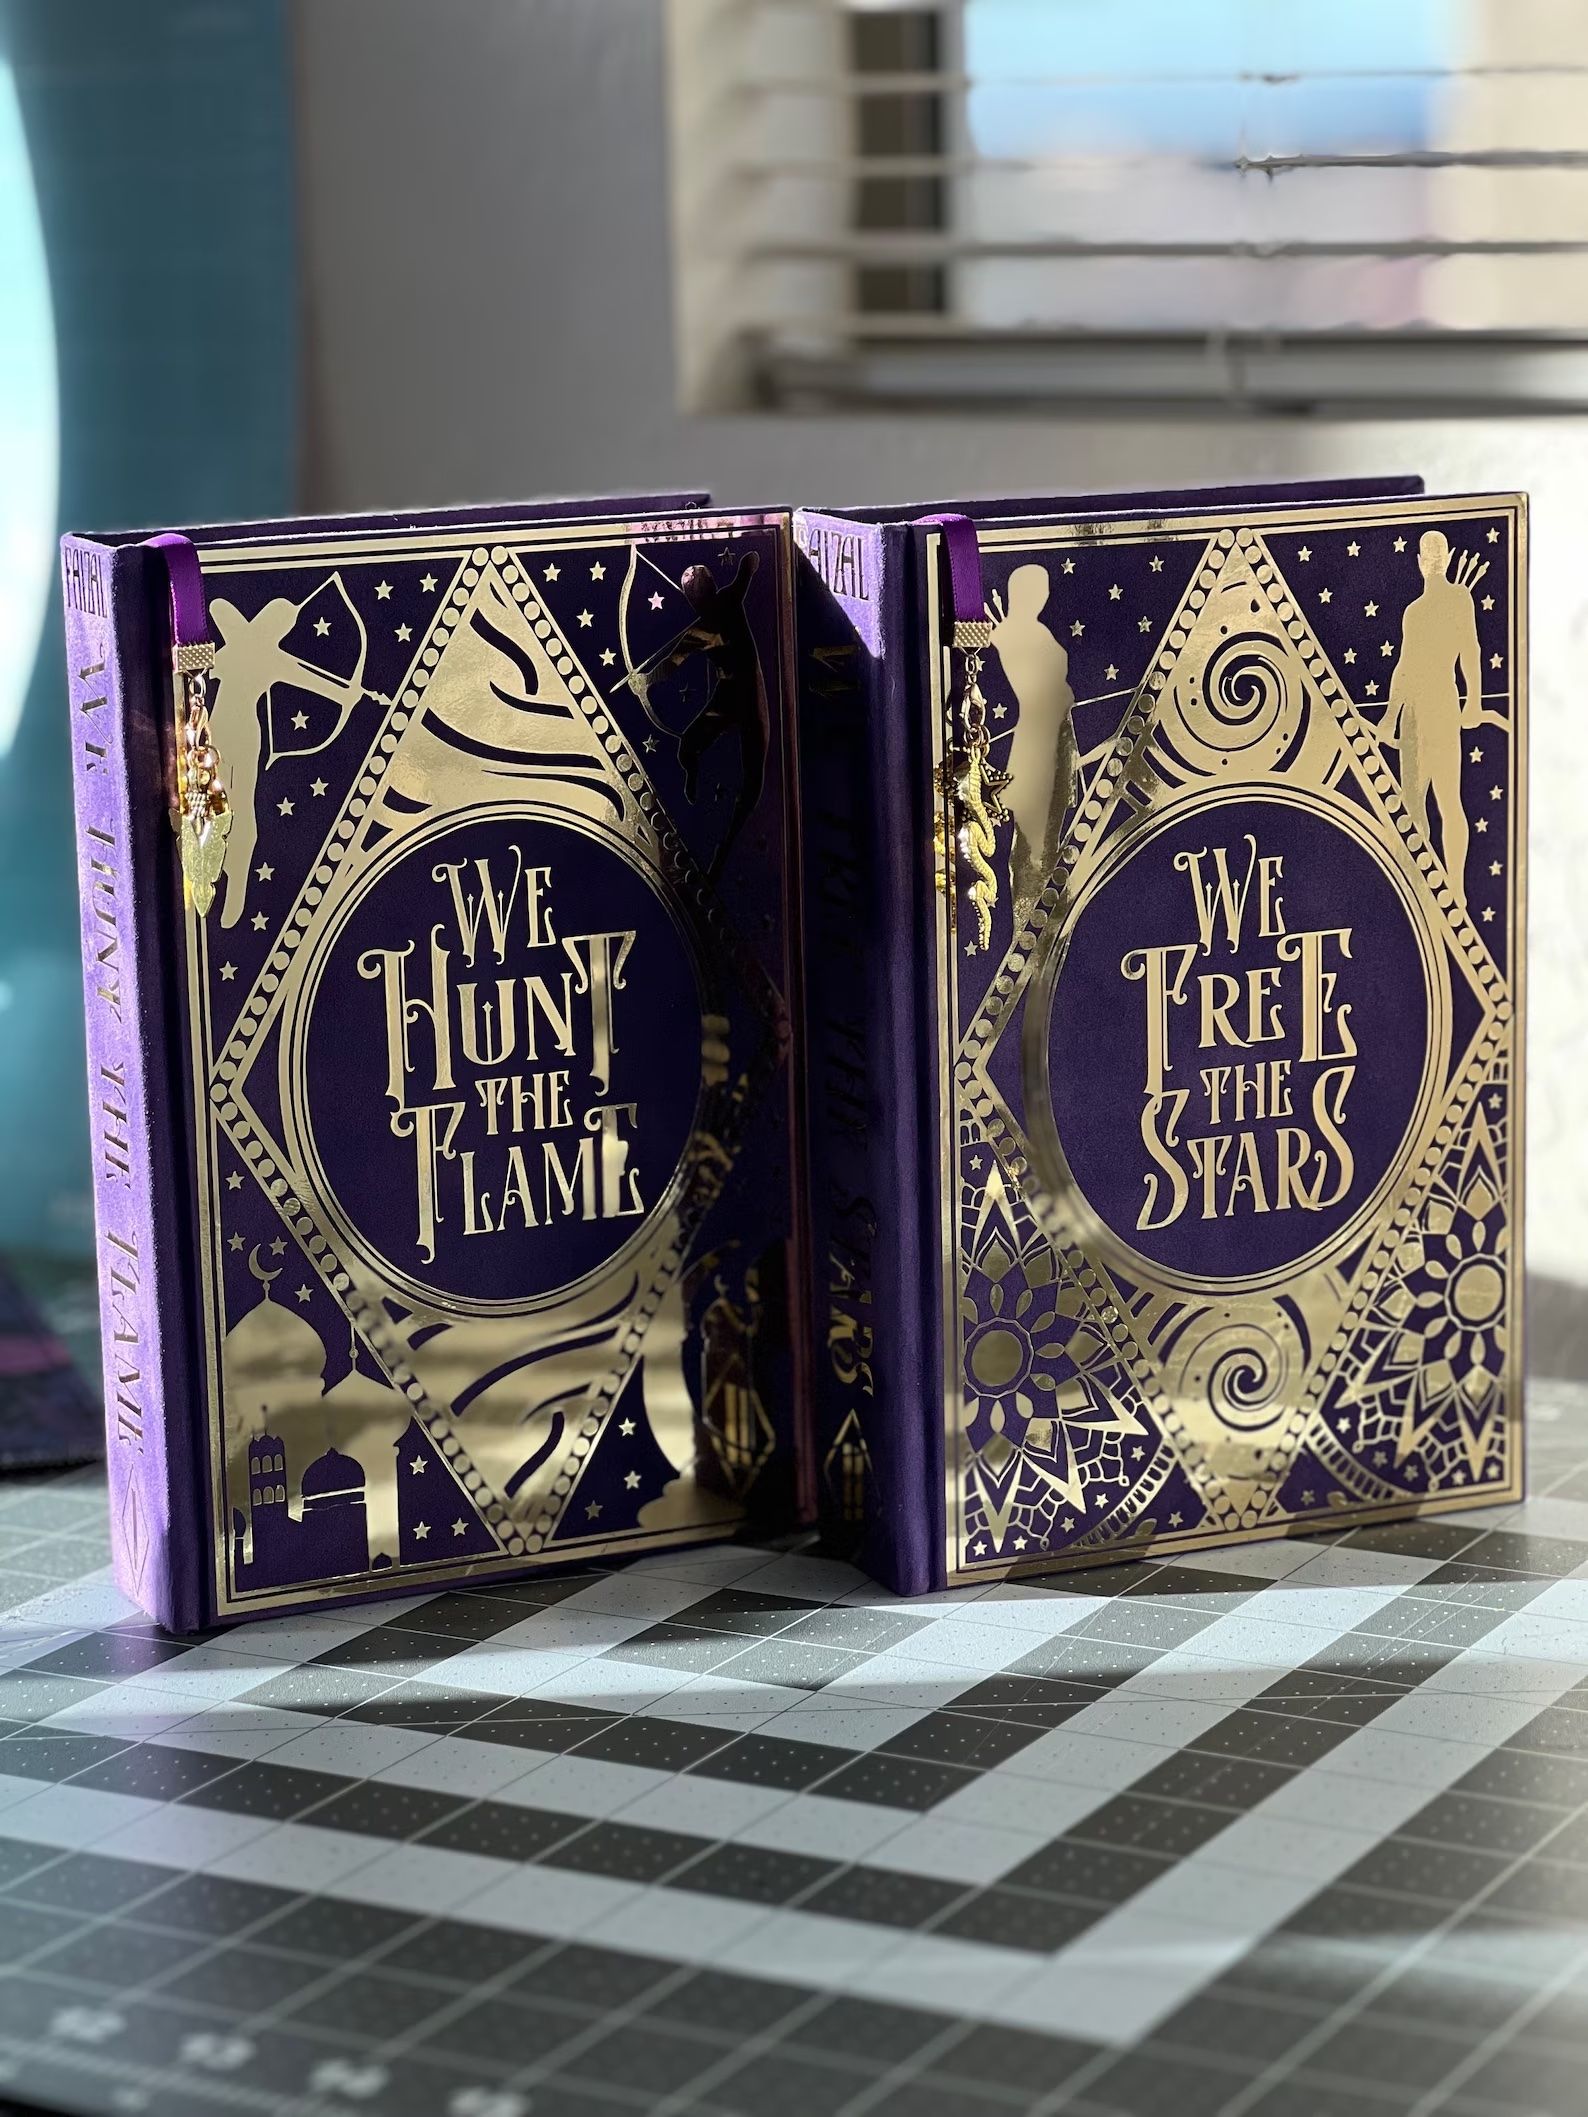 special editions of we hunt the flame and we free the stars